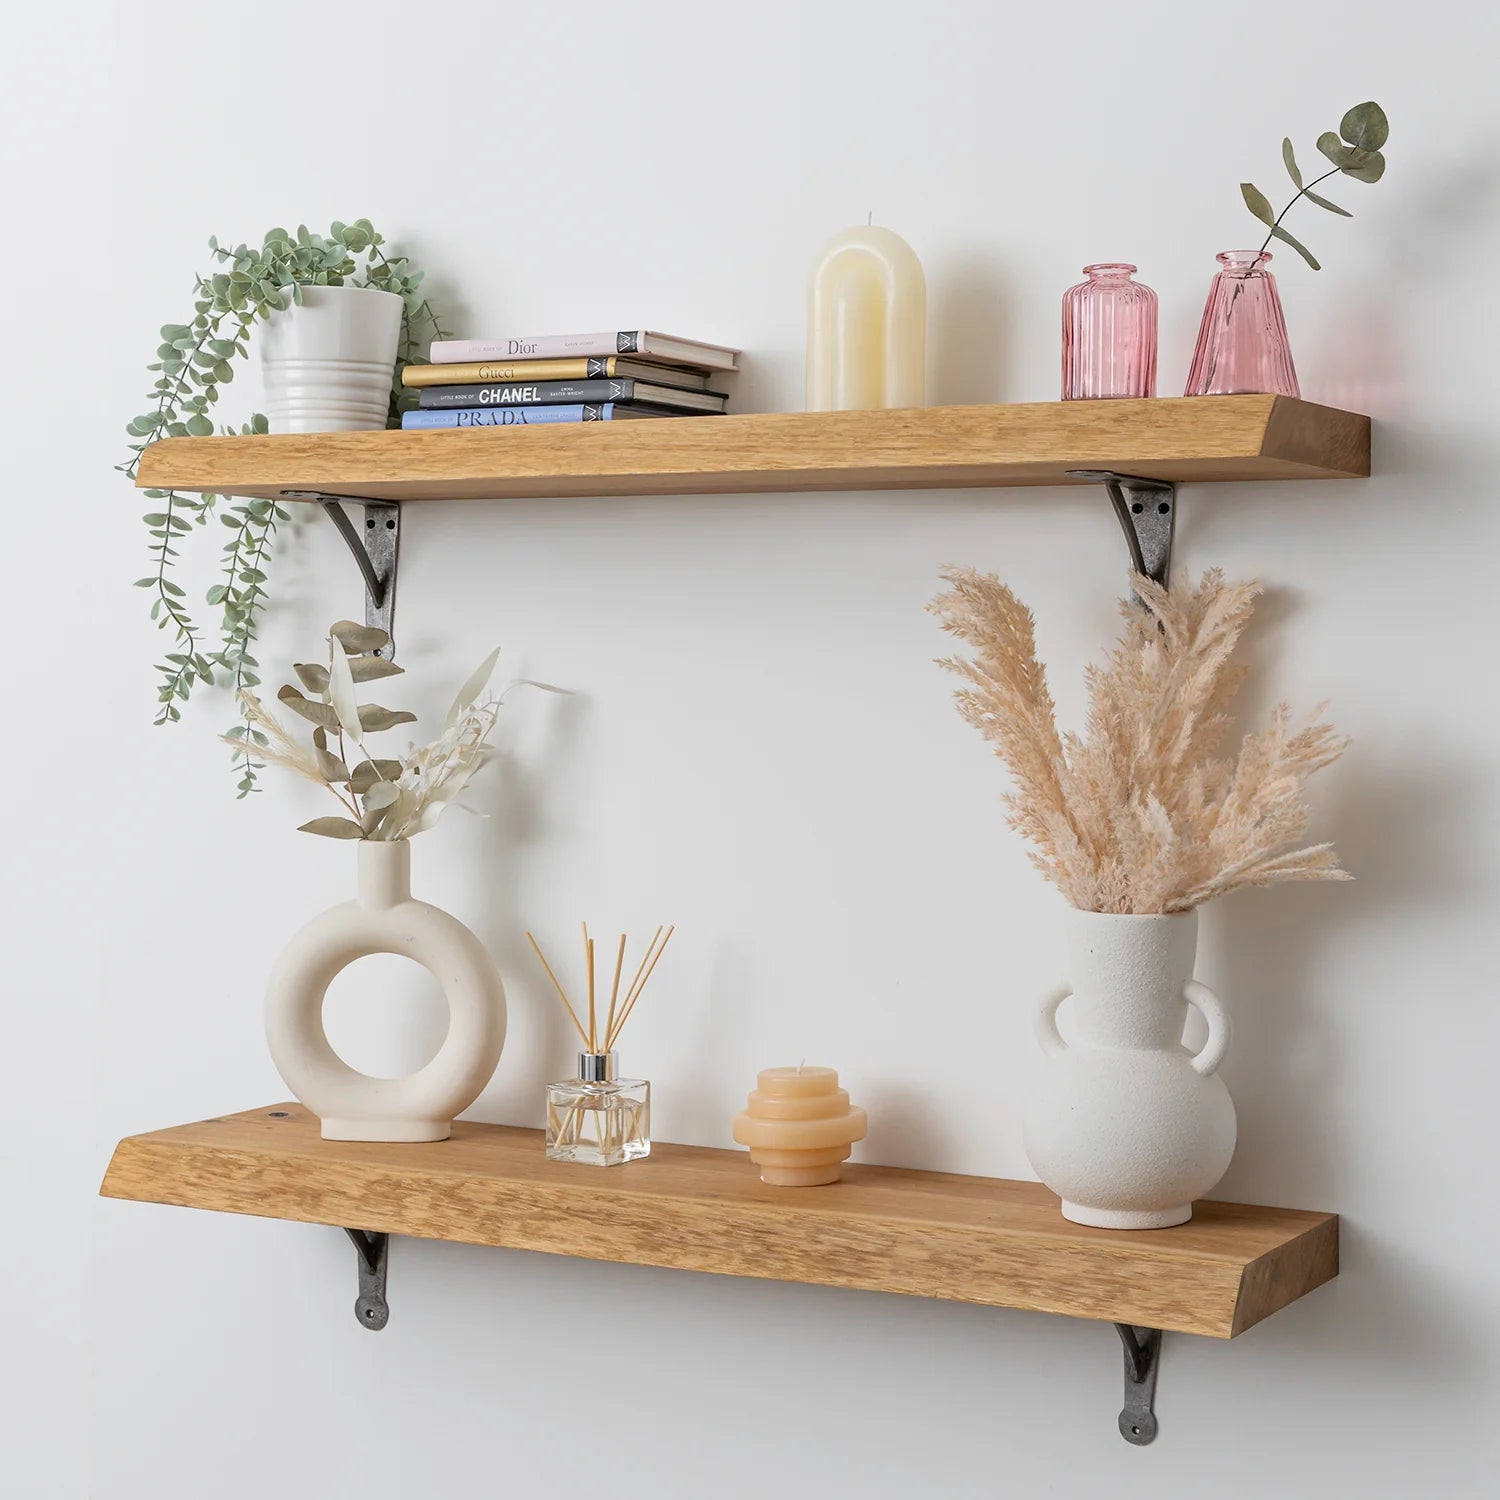 Solid Oak Live Edge Shelf - 40mm thick with Antique Iron Hand-Forged Gallows Shelf Brackets